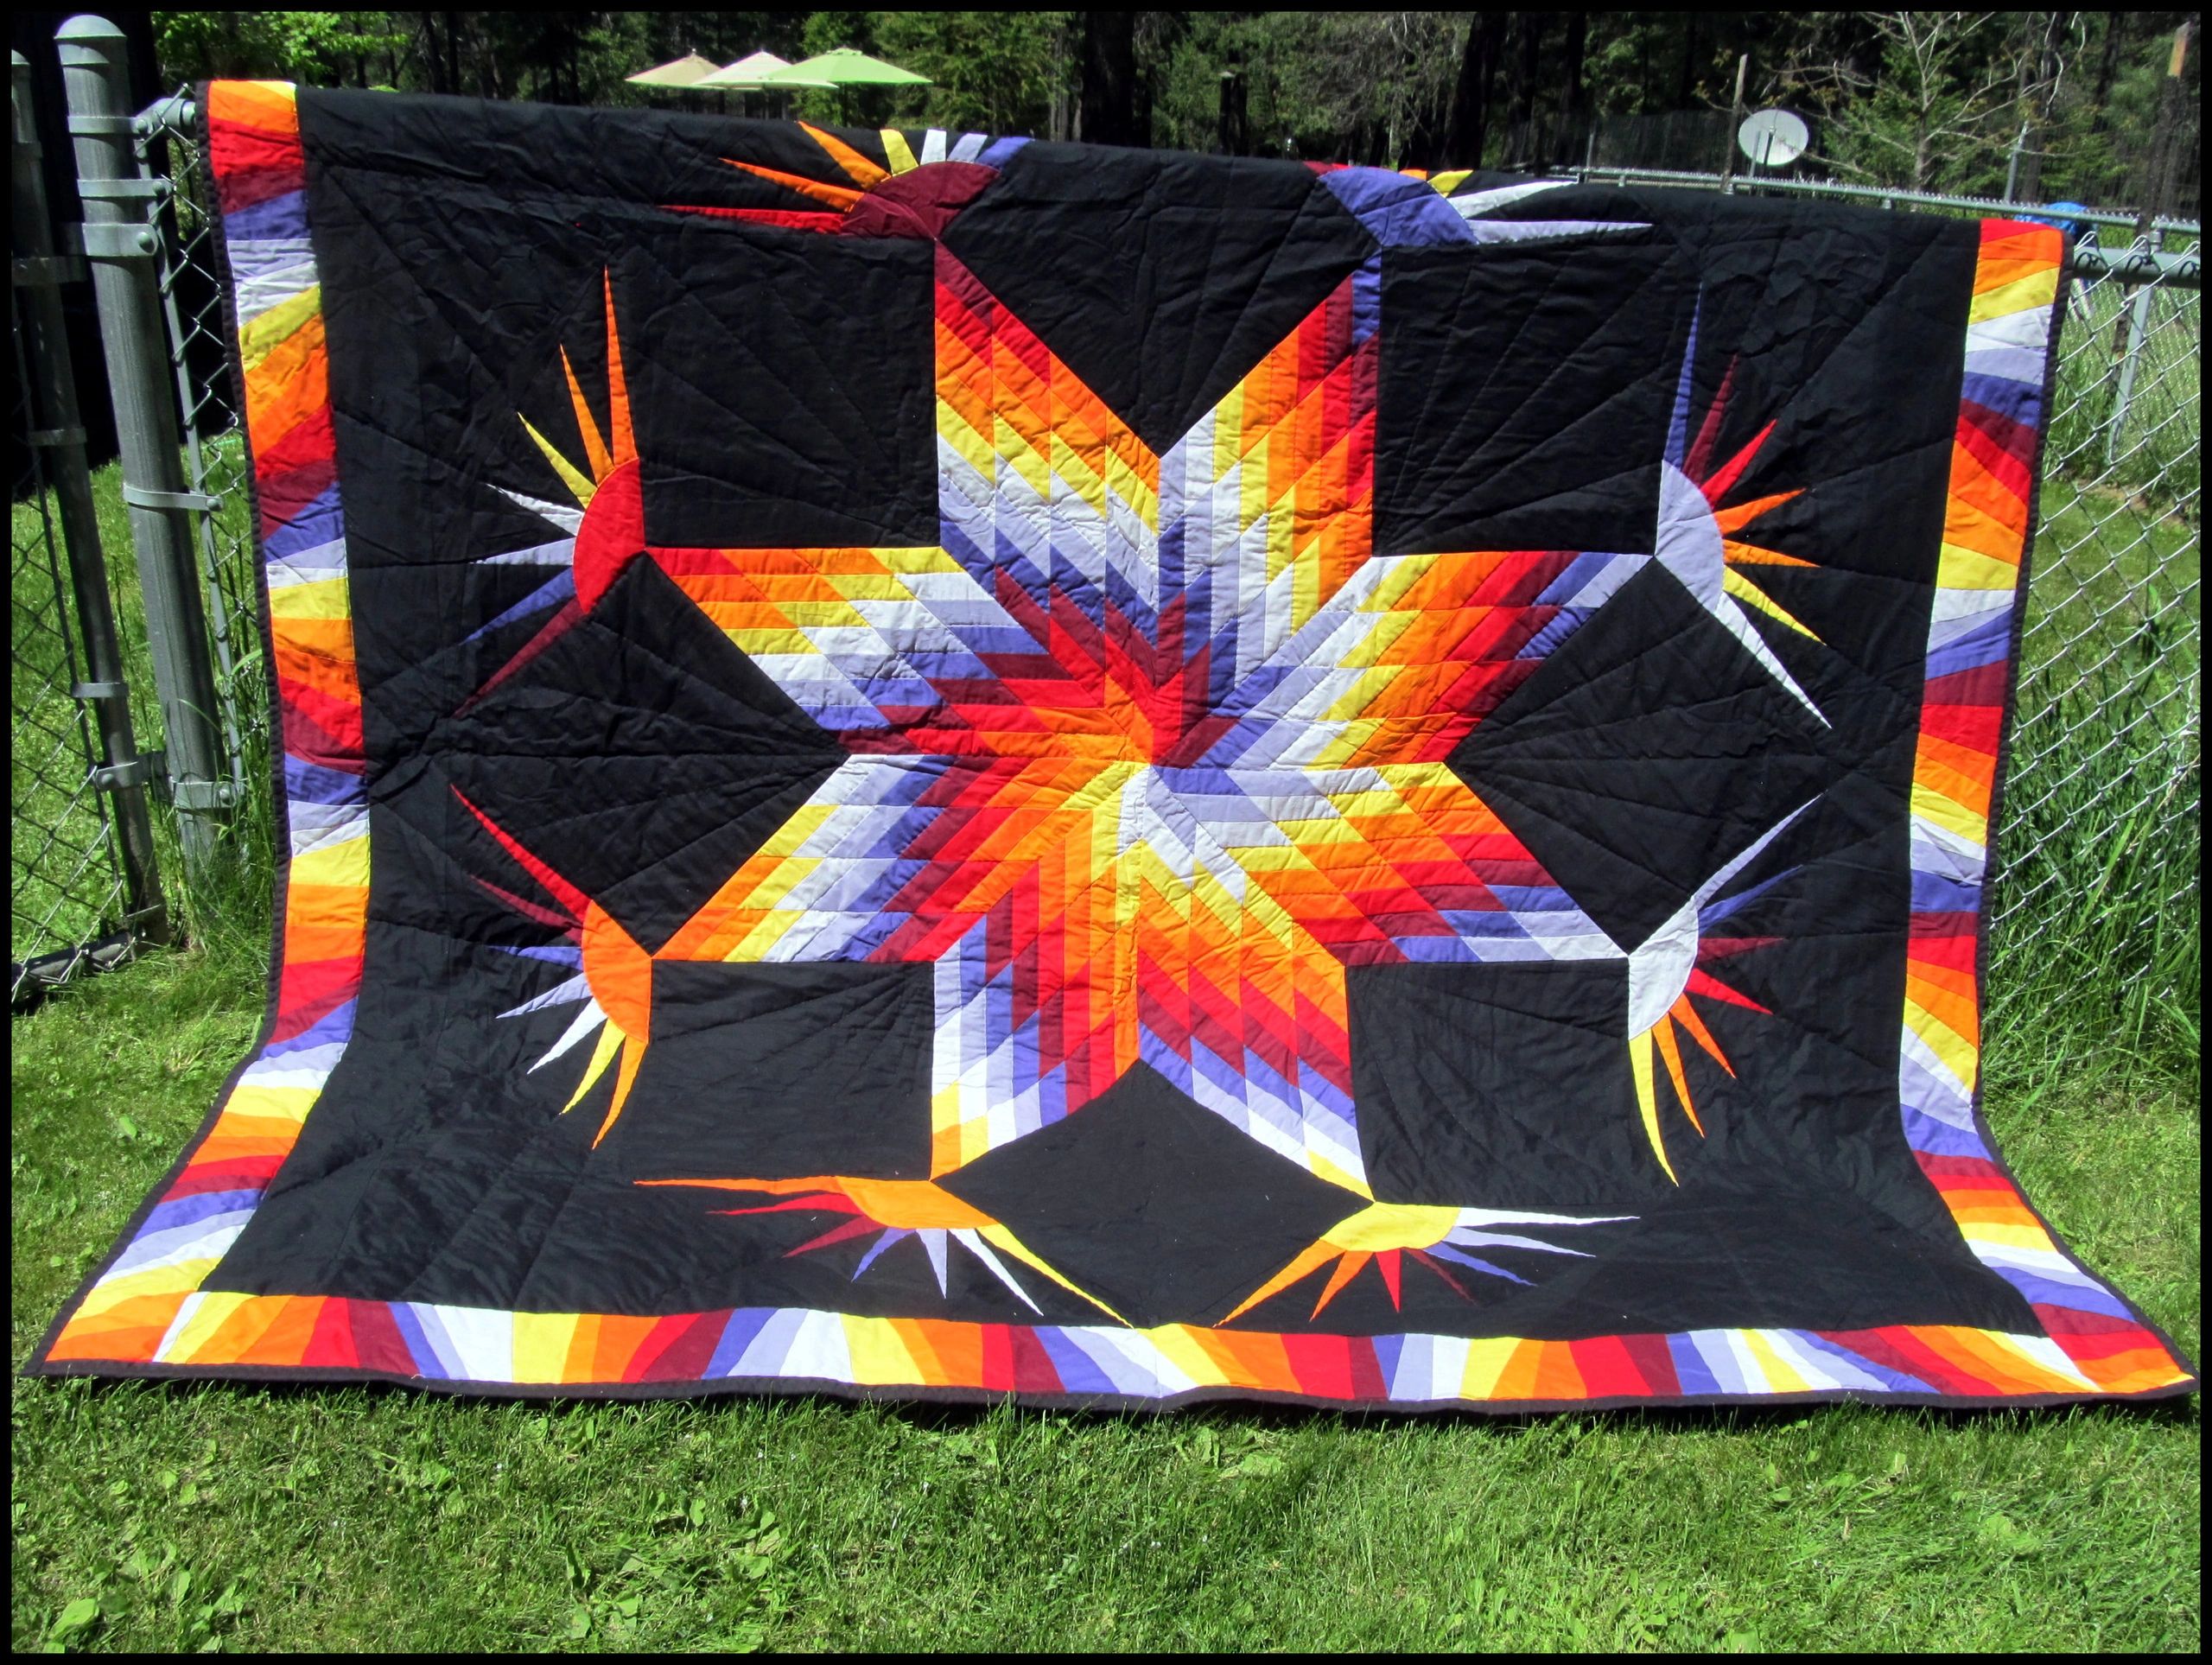 Diane's Native American Star Quilts
www.dianesnativeamericanstarquilts.net 